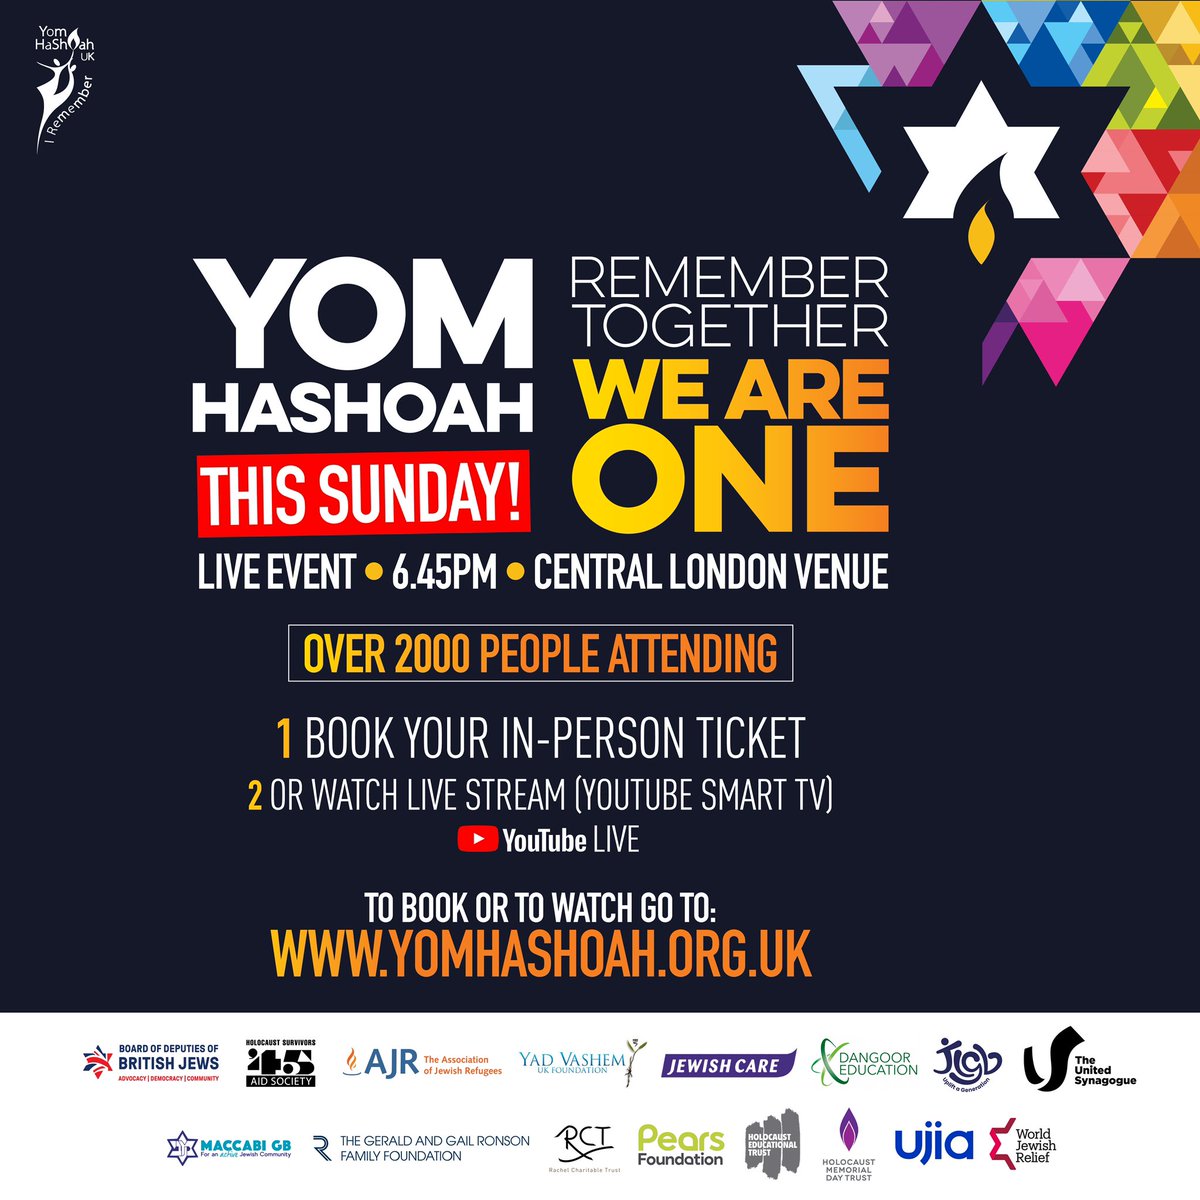 This Sunday, 2,000 people booked to attend, are you? Book tickets now or visit for LIVE stream info at yomhashoah.org.uk